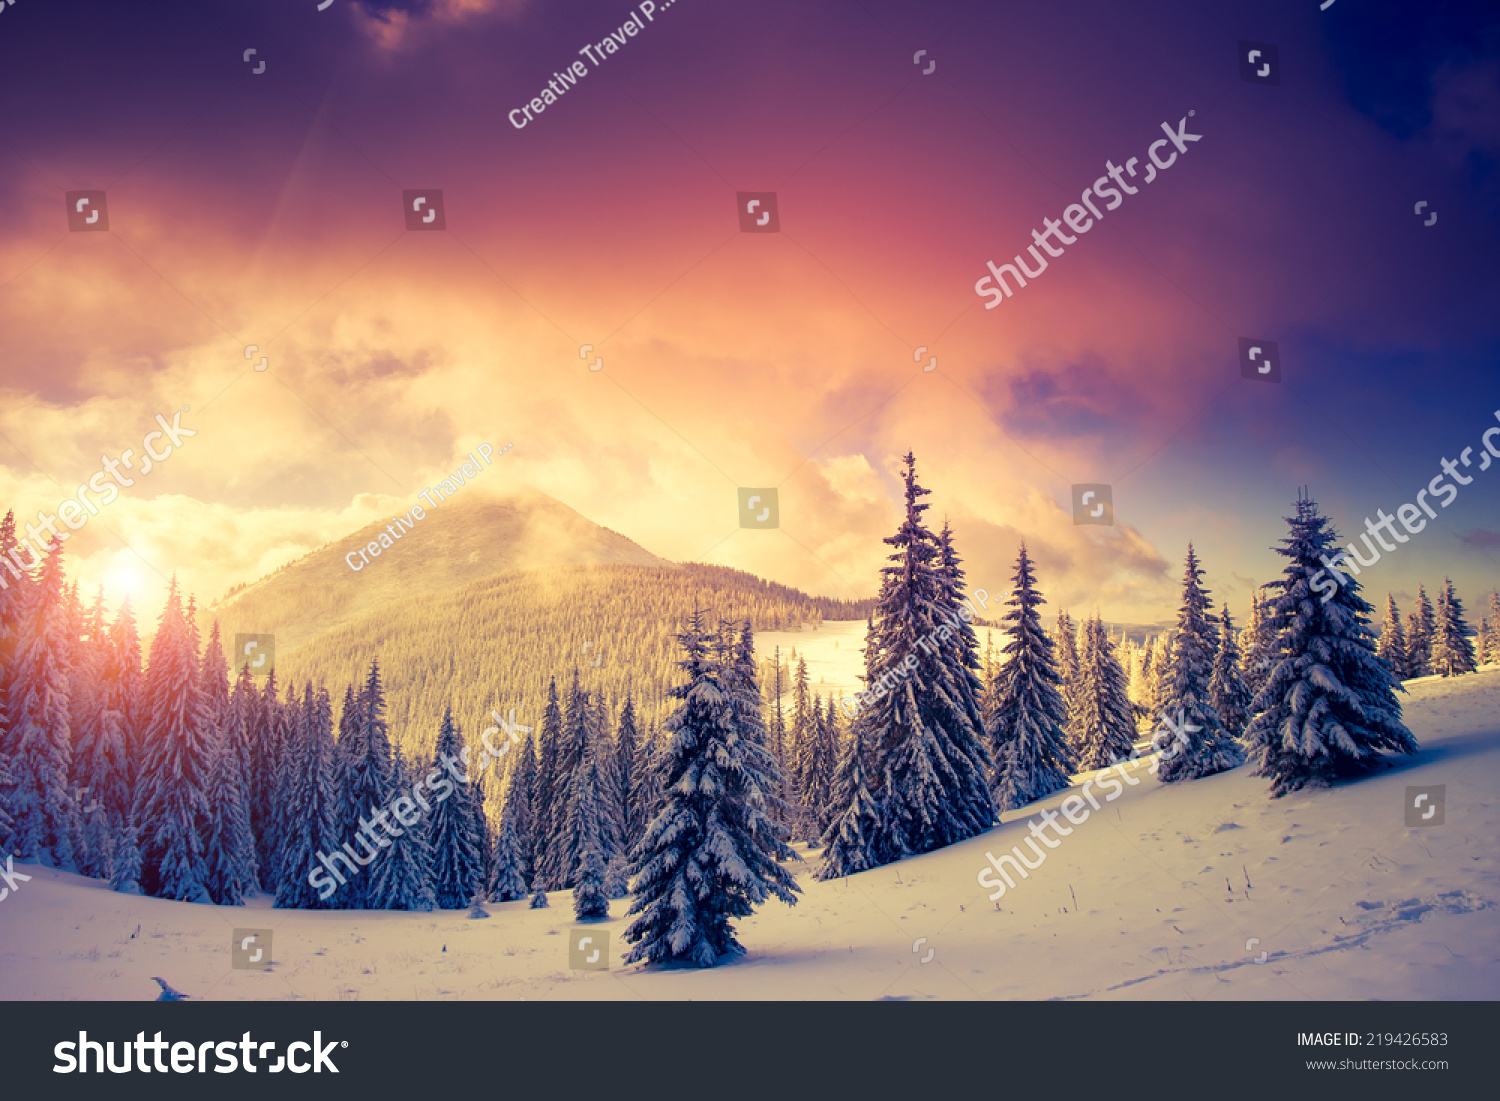 Fantastic evening landscape in a colorful sunlight. Dramatic wintry scene. National Park Carpathian, Ukraine, Europe. Beauty world. Retro style filter. Instagram toning effect. Happy New Year! #219426583